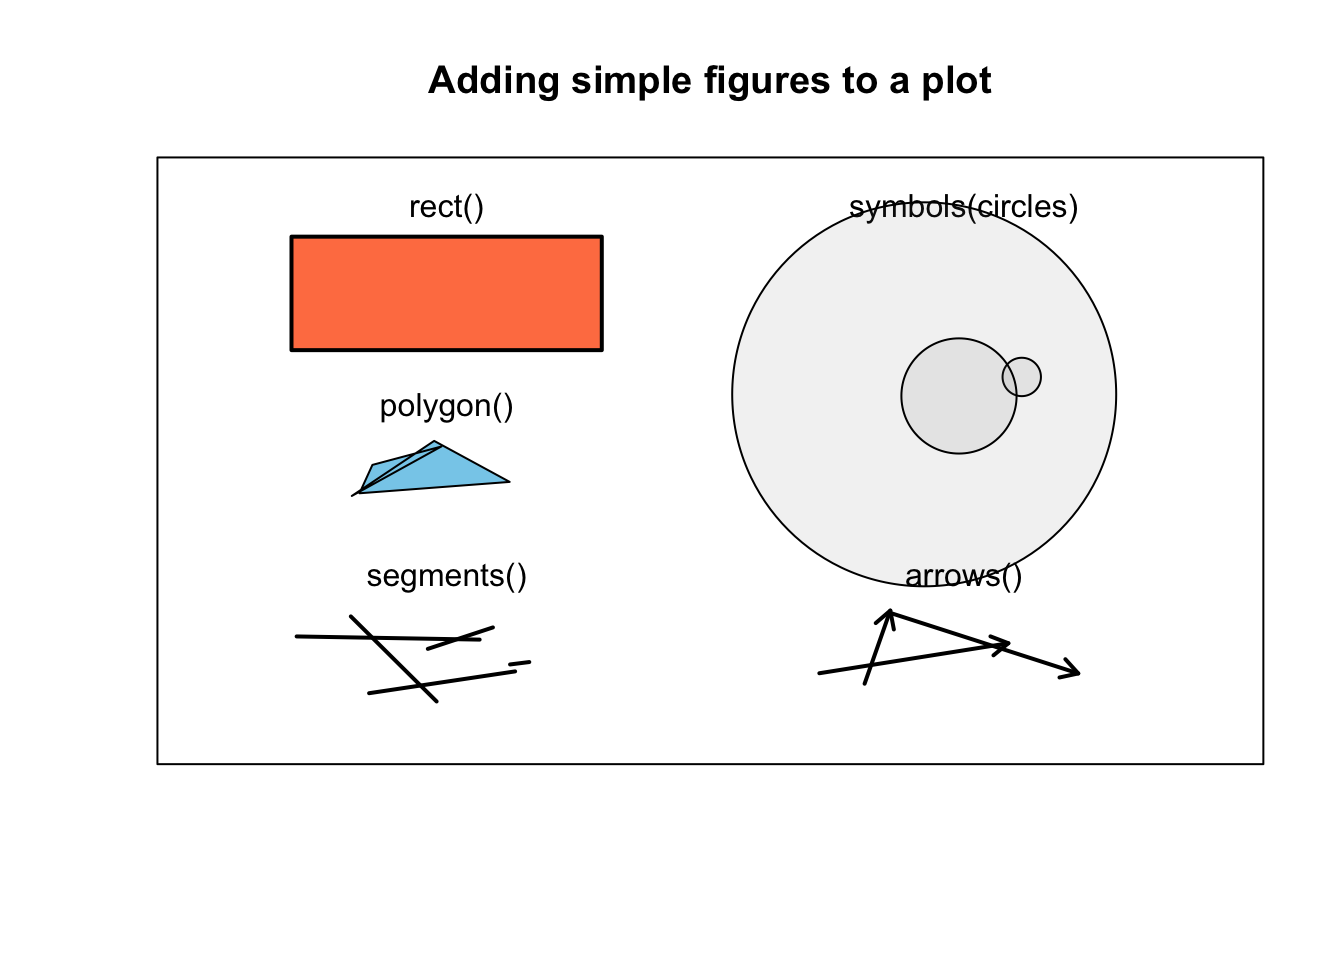 Additional figures one can add to a plot with rect(), polygon(), segments(), symbols(), and arrows().